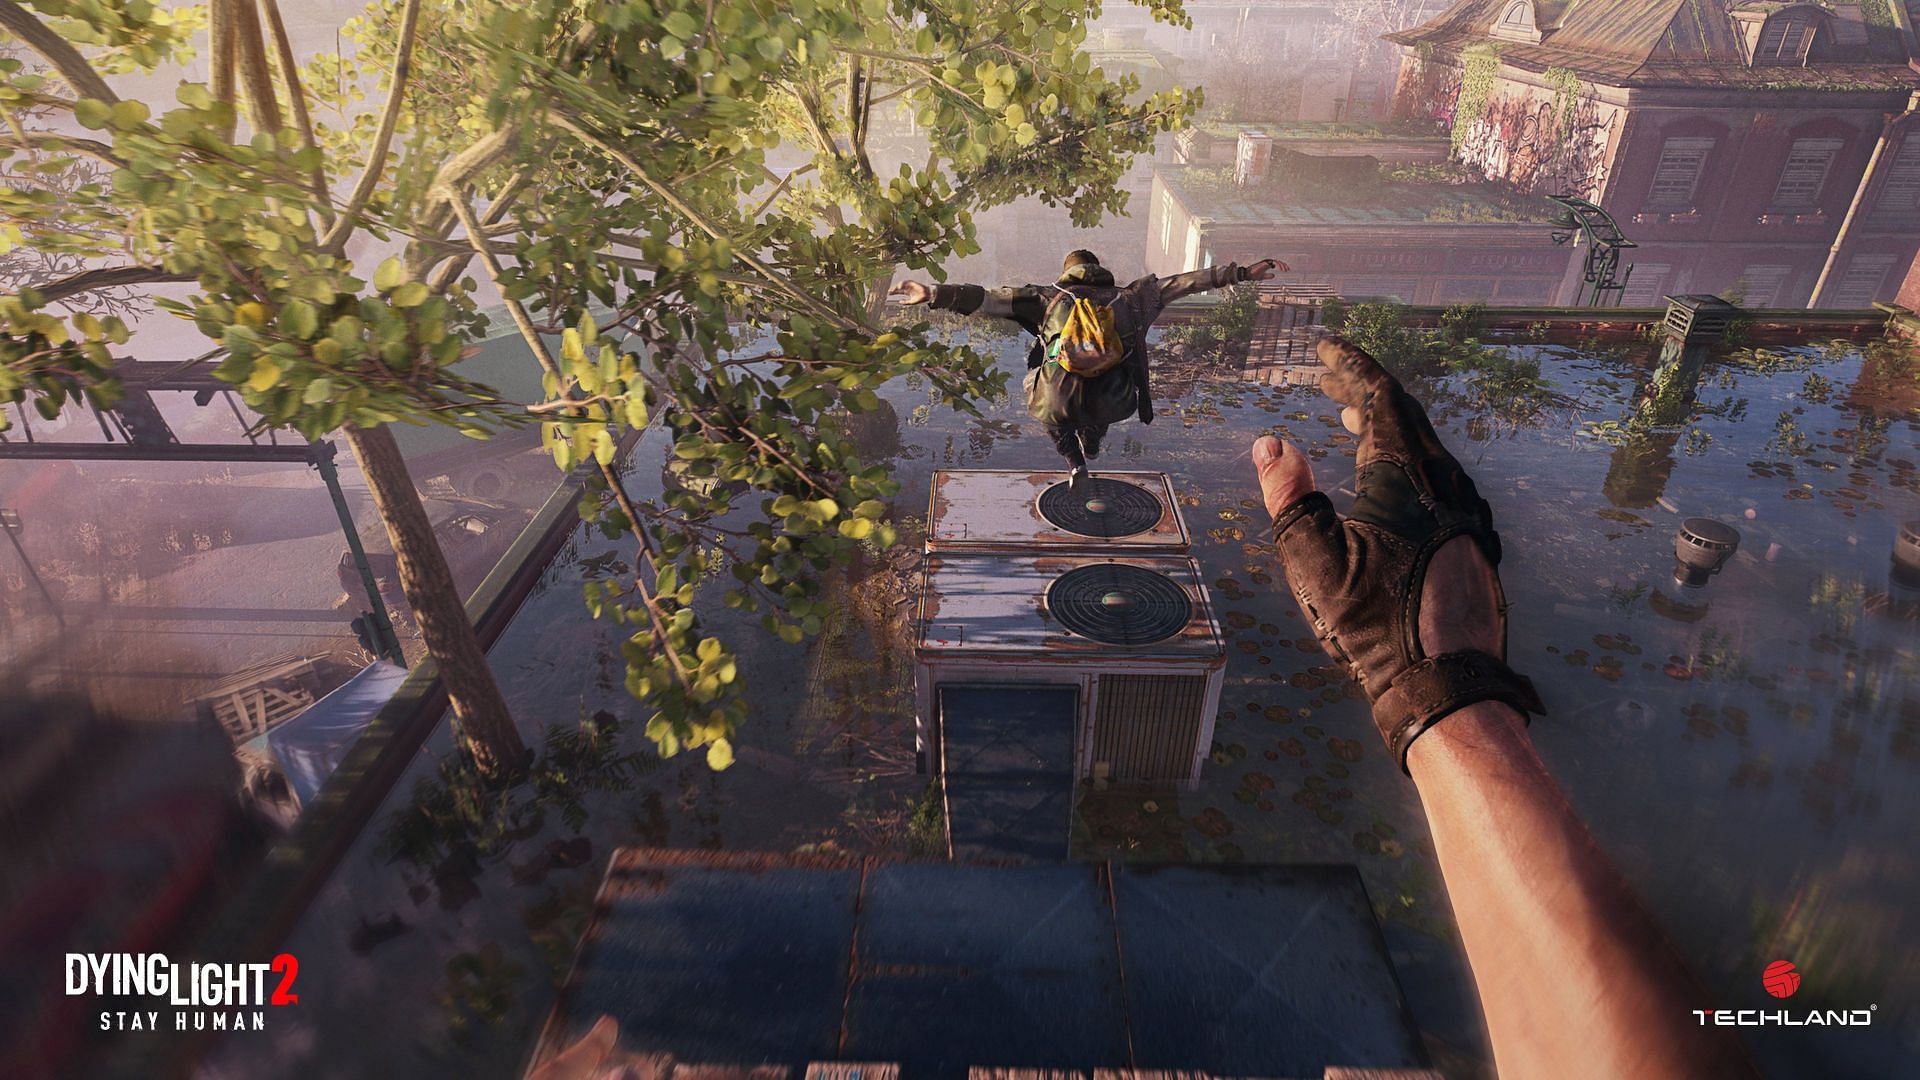 Dying Light 2 Multiplayer Co-op: How to Unlock It